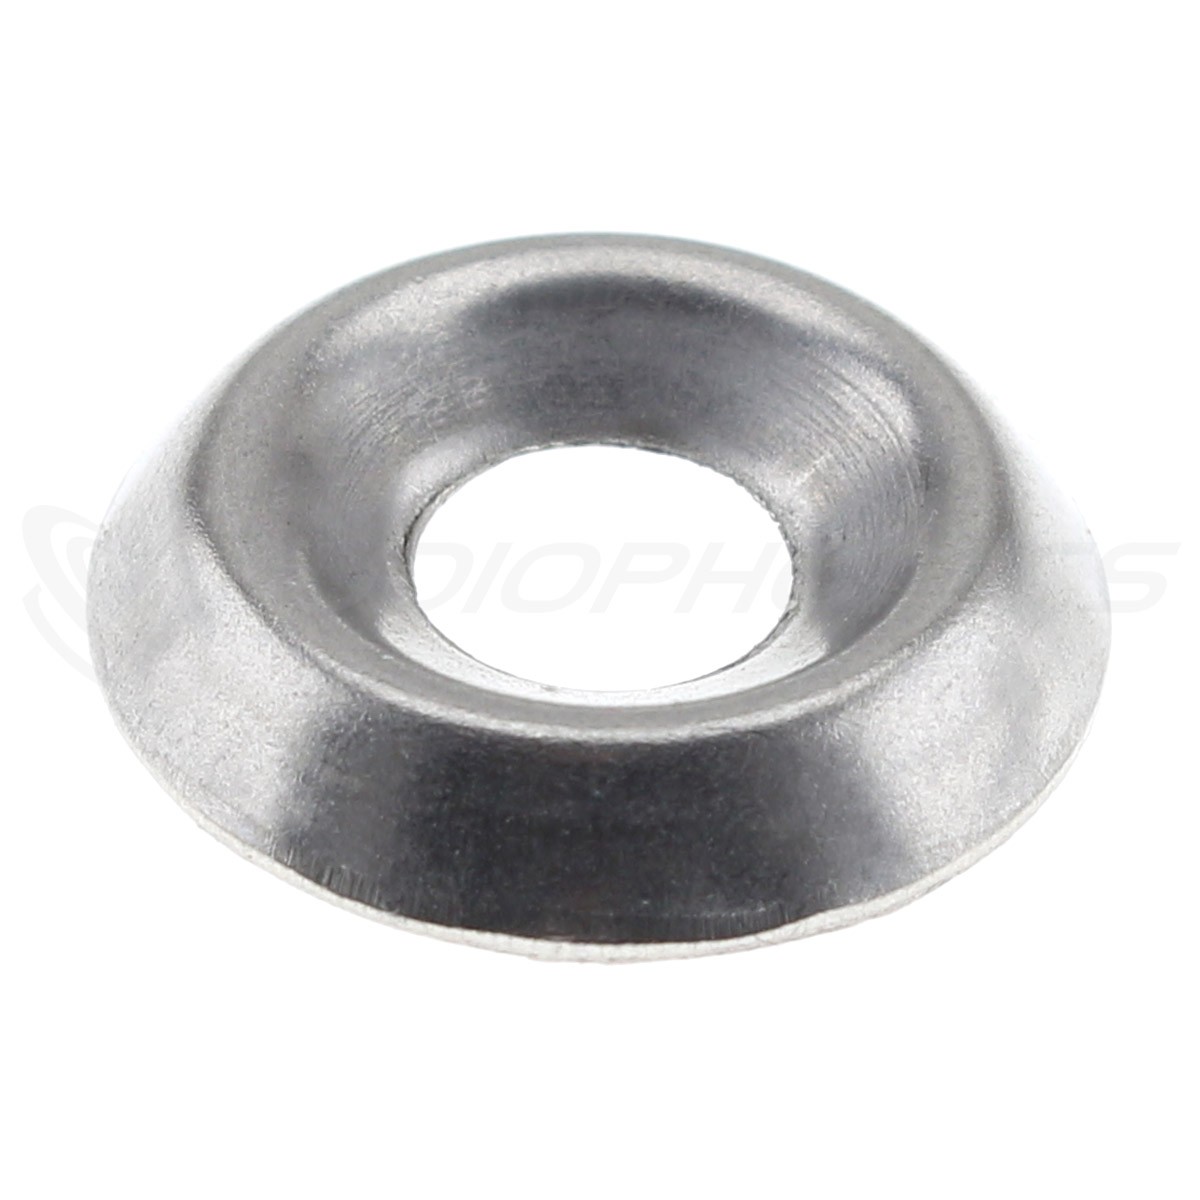 Stamped Washer Cup Stainless Steel M5x15x3mm Silver (x10)